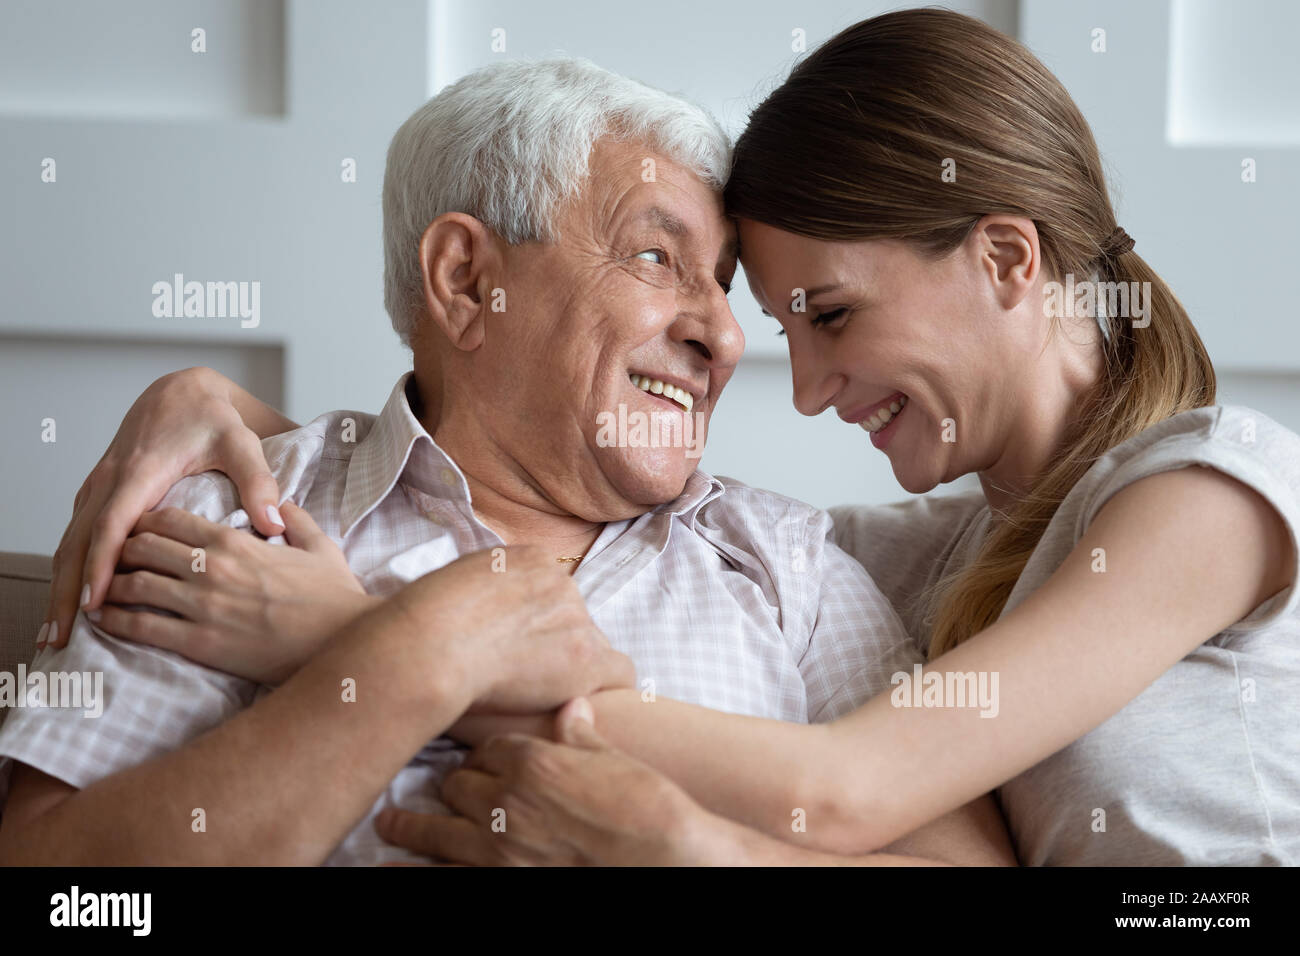 Laughing young 30s woman embracing happy older father. Stock Photo